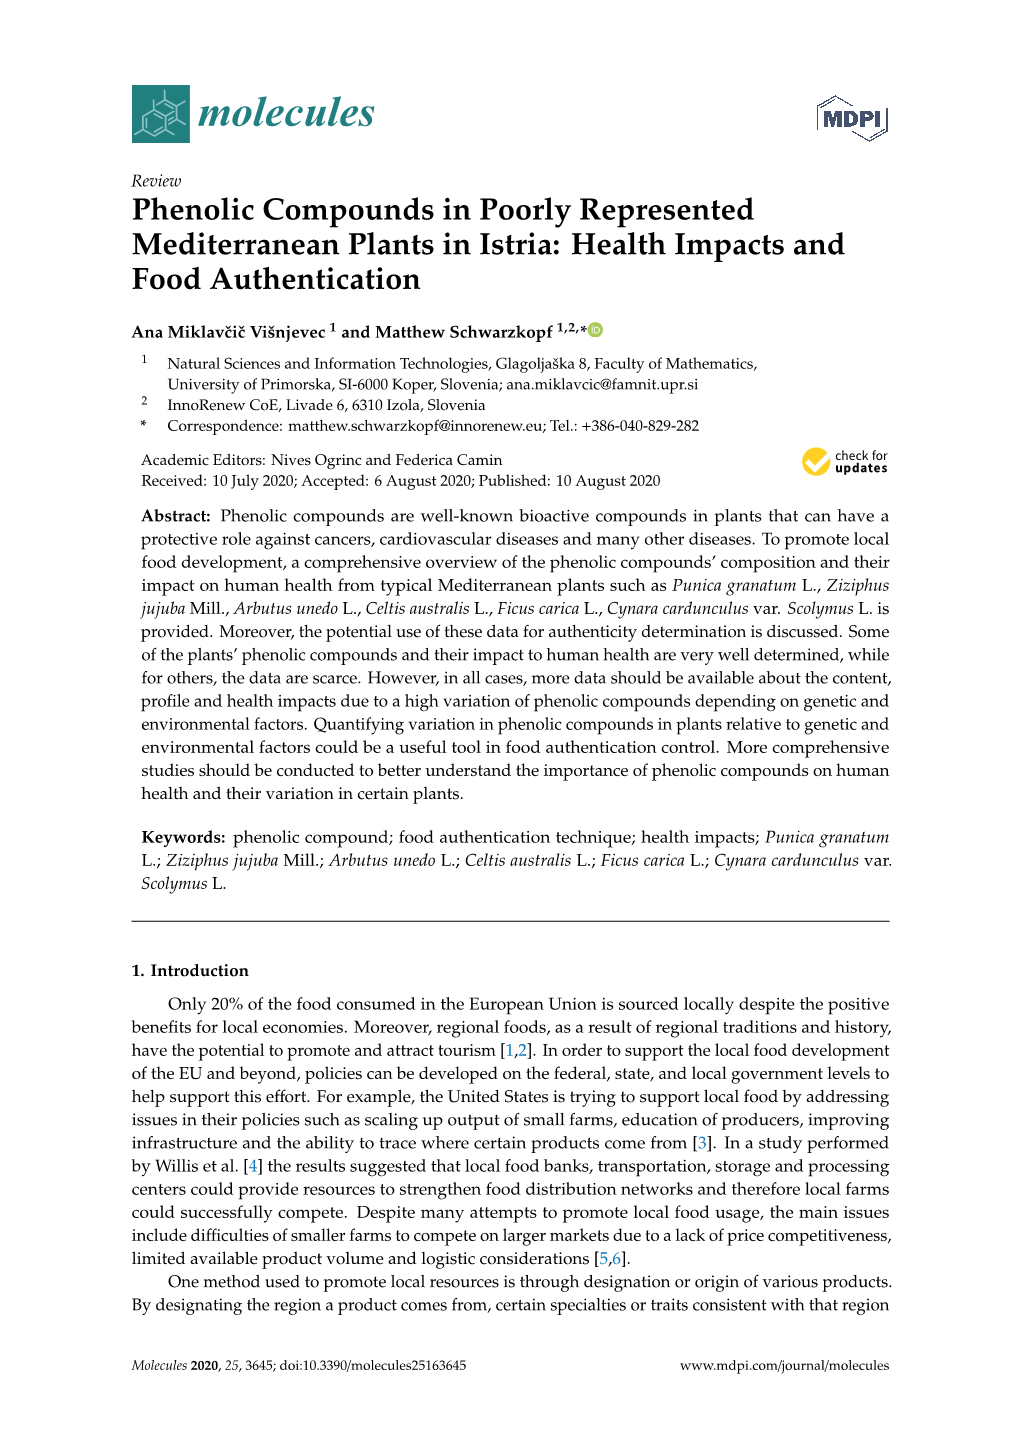 Phenolic Compounds in Poorly Represented Mediterranean Plants in Istria: Health Impacts and Food Authentication